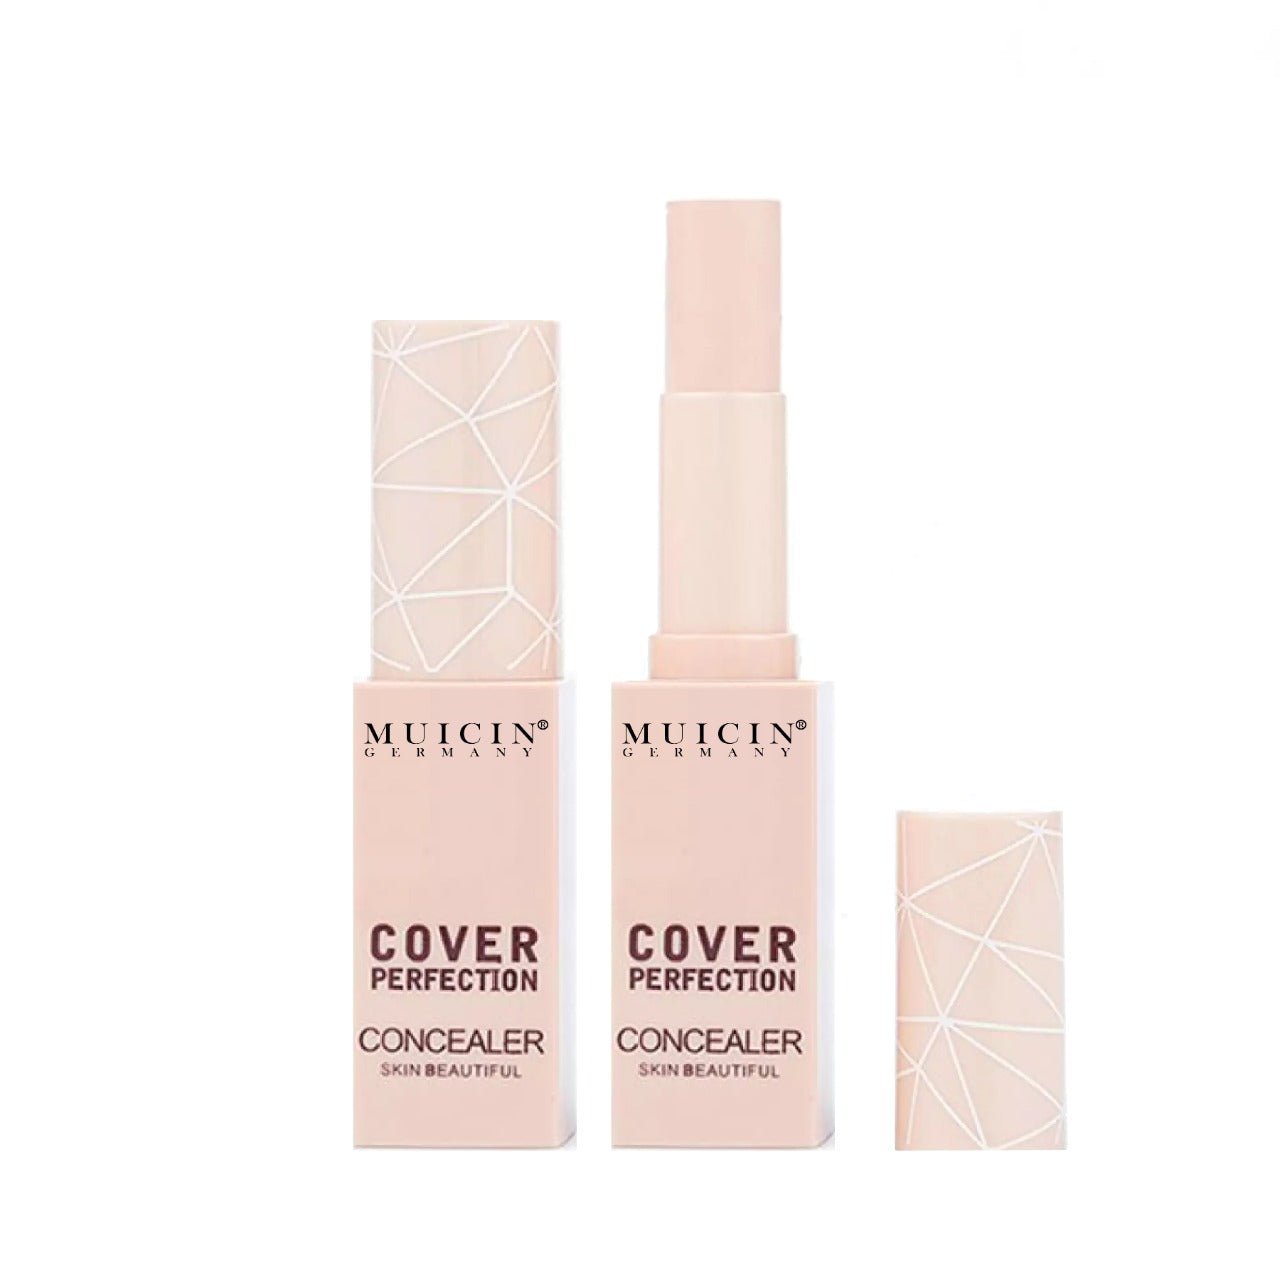 MUICIIN COVER PERFECTION CONCEALER 